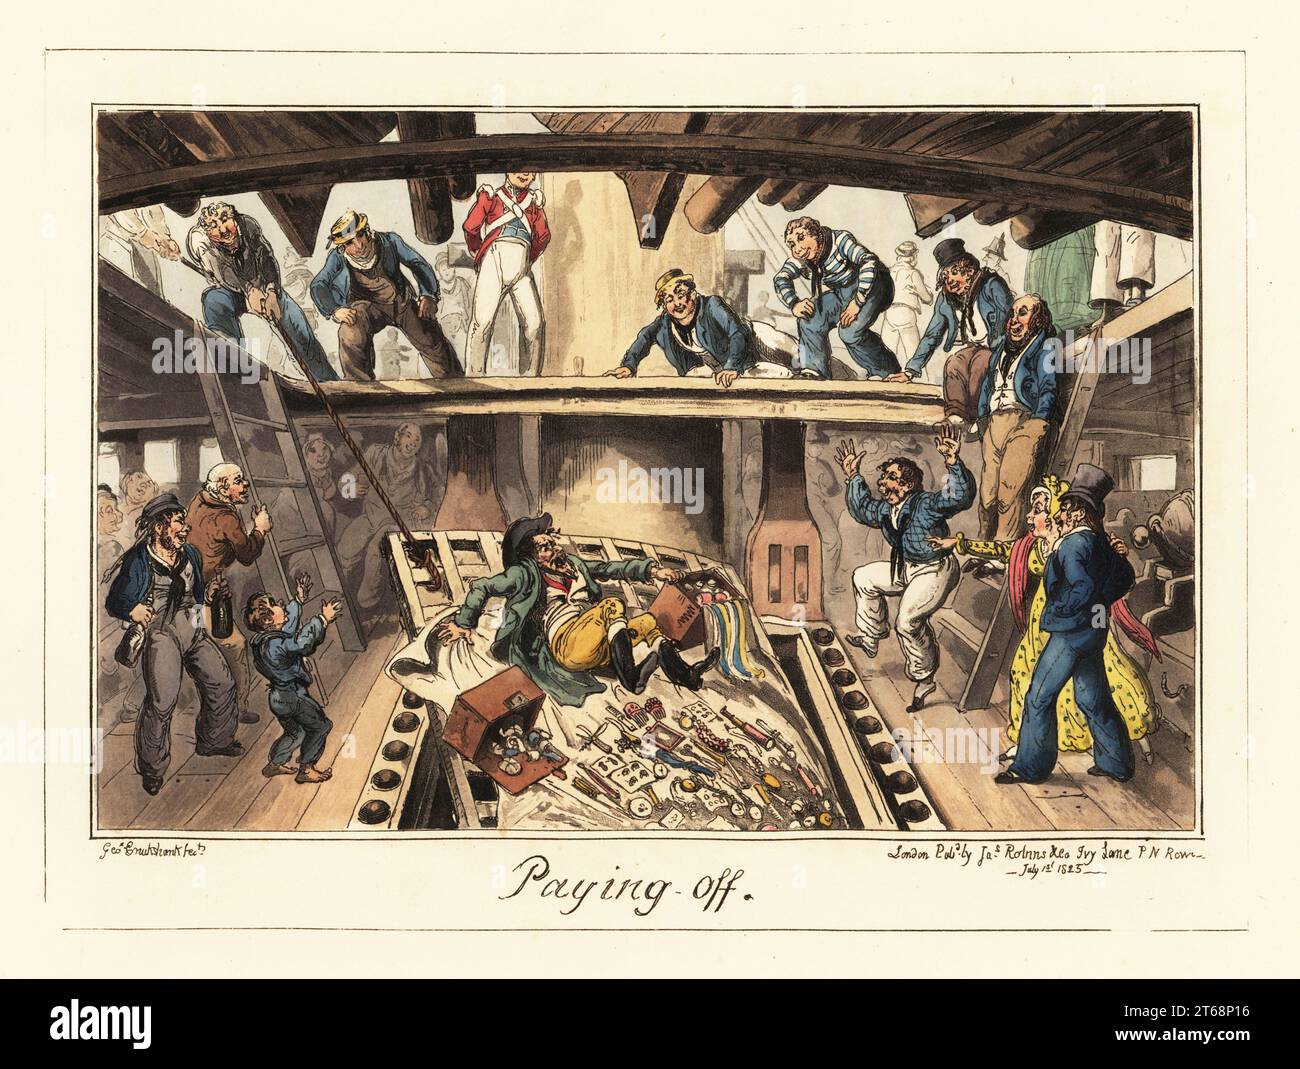 Sailors taking revenge on a Jewish merchant, Napoleonic era. Solomon Schernbac and his shoddy goods are dropped through a grating down into the gun deck. Seamen, officers and women watch and laugh. Paying Off. Handcoloured lithograph by George Cruikshank from Greenwich Hospital, a Series of Naval Sketches, by An Old Sailor (Matthew H. Barker), published by James Robins, London, 1826. Stock Photo